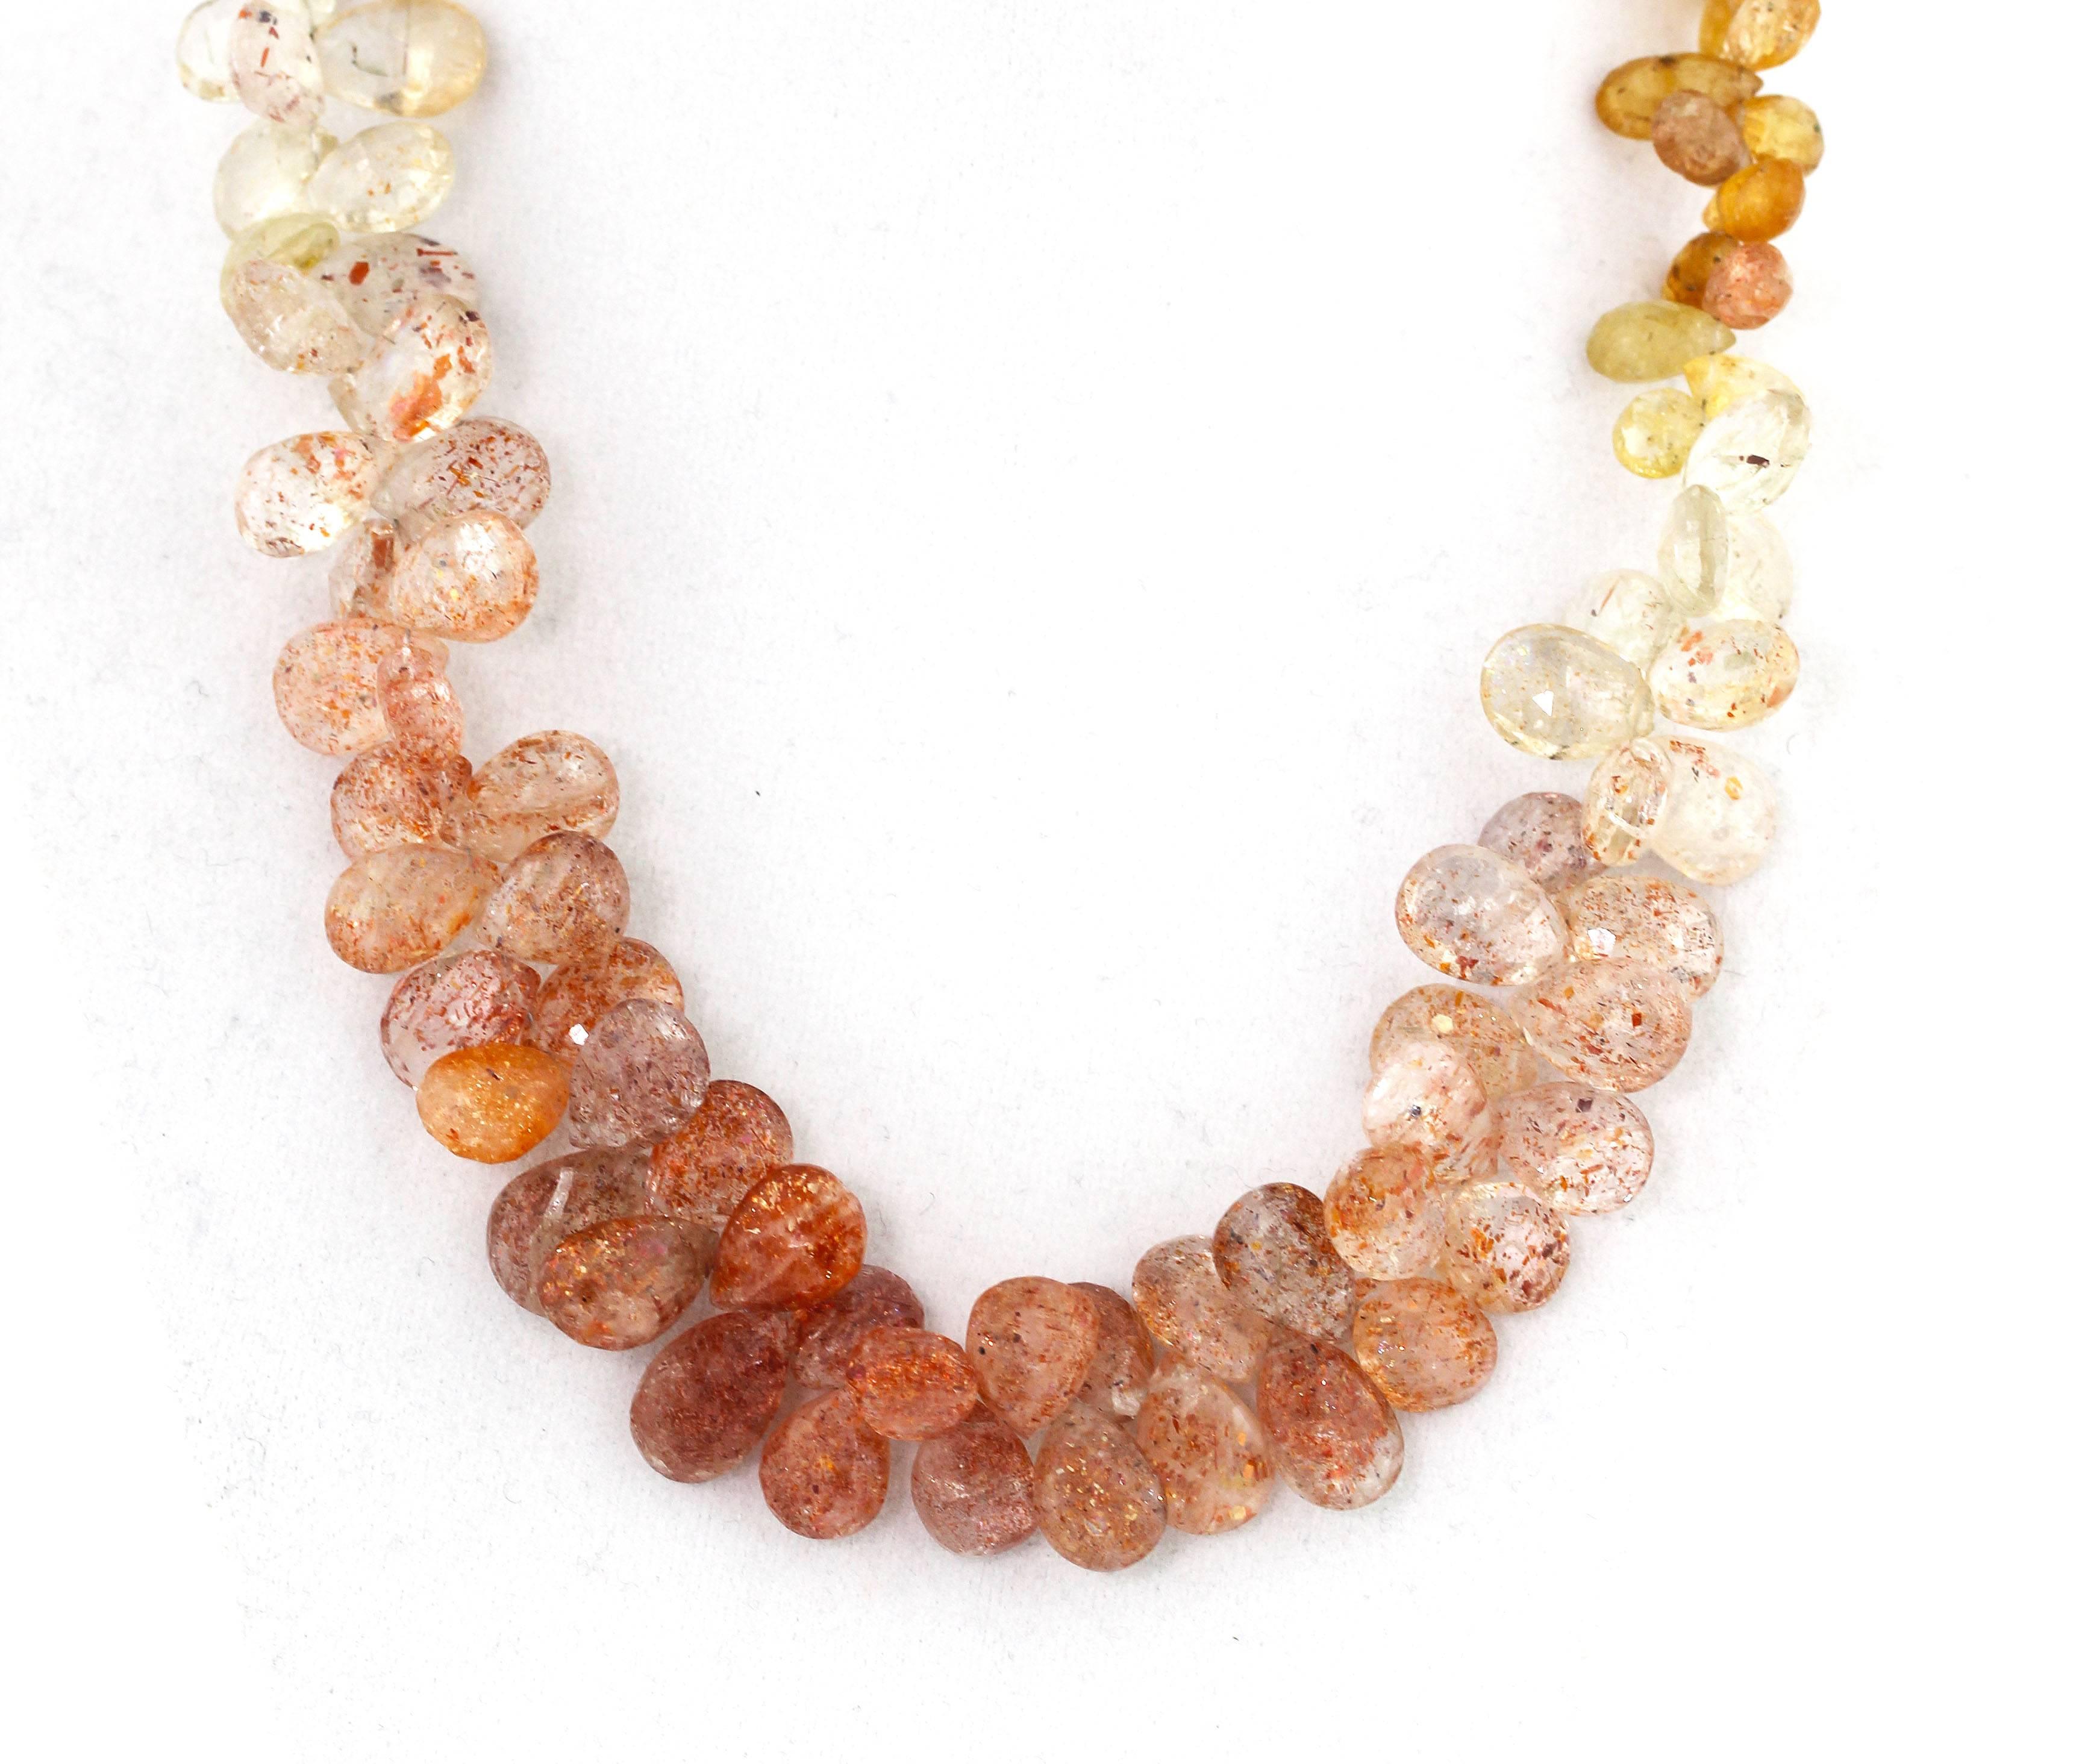 Glittering brilliant handmade checkerboard gem cut petals of the rare Imperial Topaz gemstones (from Brazil) are multi colored and are set in an 18 inch necklace with a gold plated (Vermeil) clasp.  The largest petals are approximately 14 mm x 9 mm.